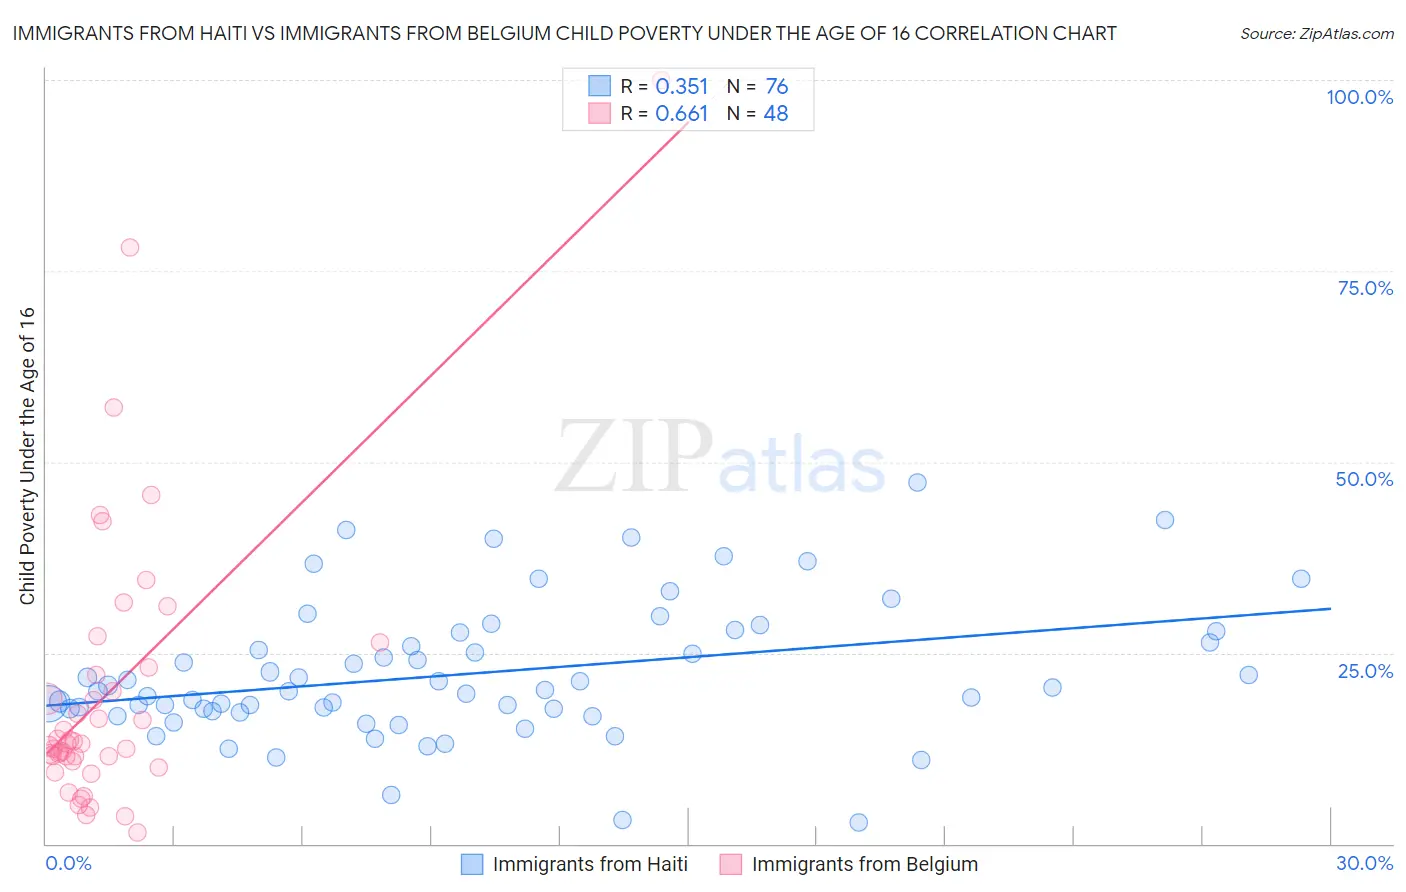 Immigrants from Haiti vs Immigrants from Belgium Child Poverty Under the Age of 16